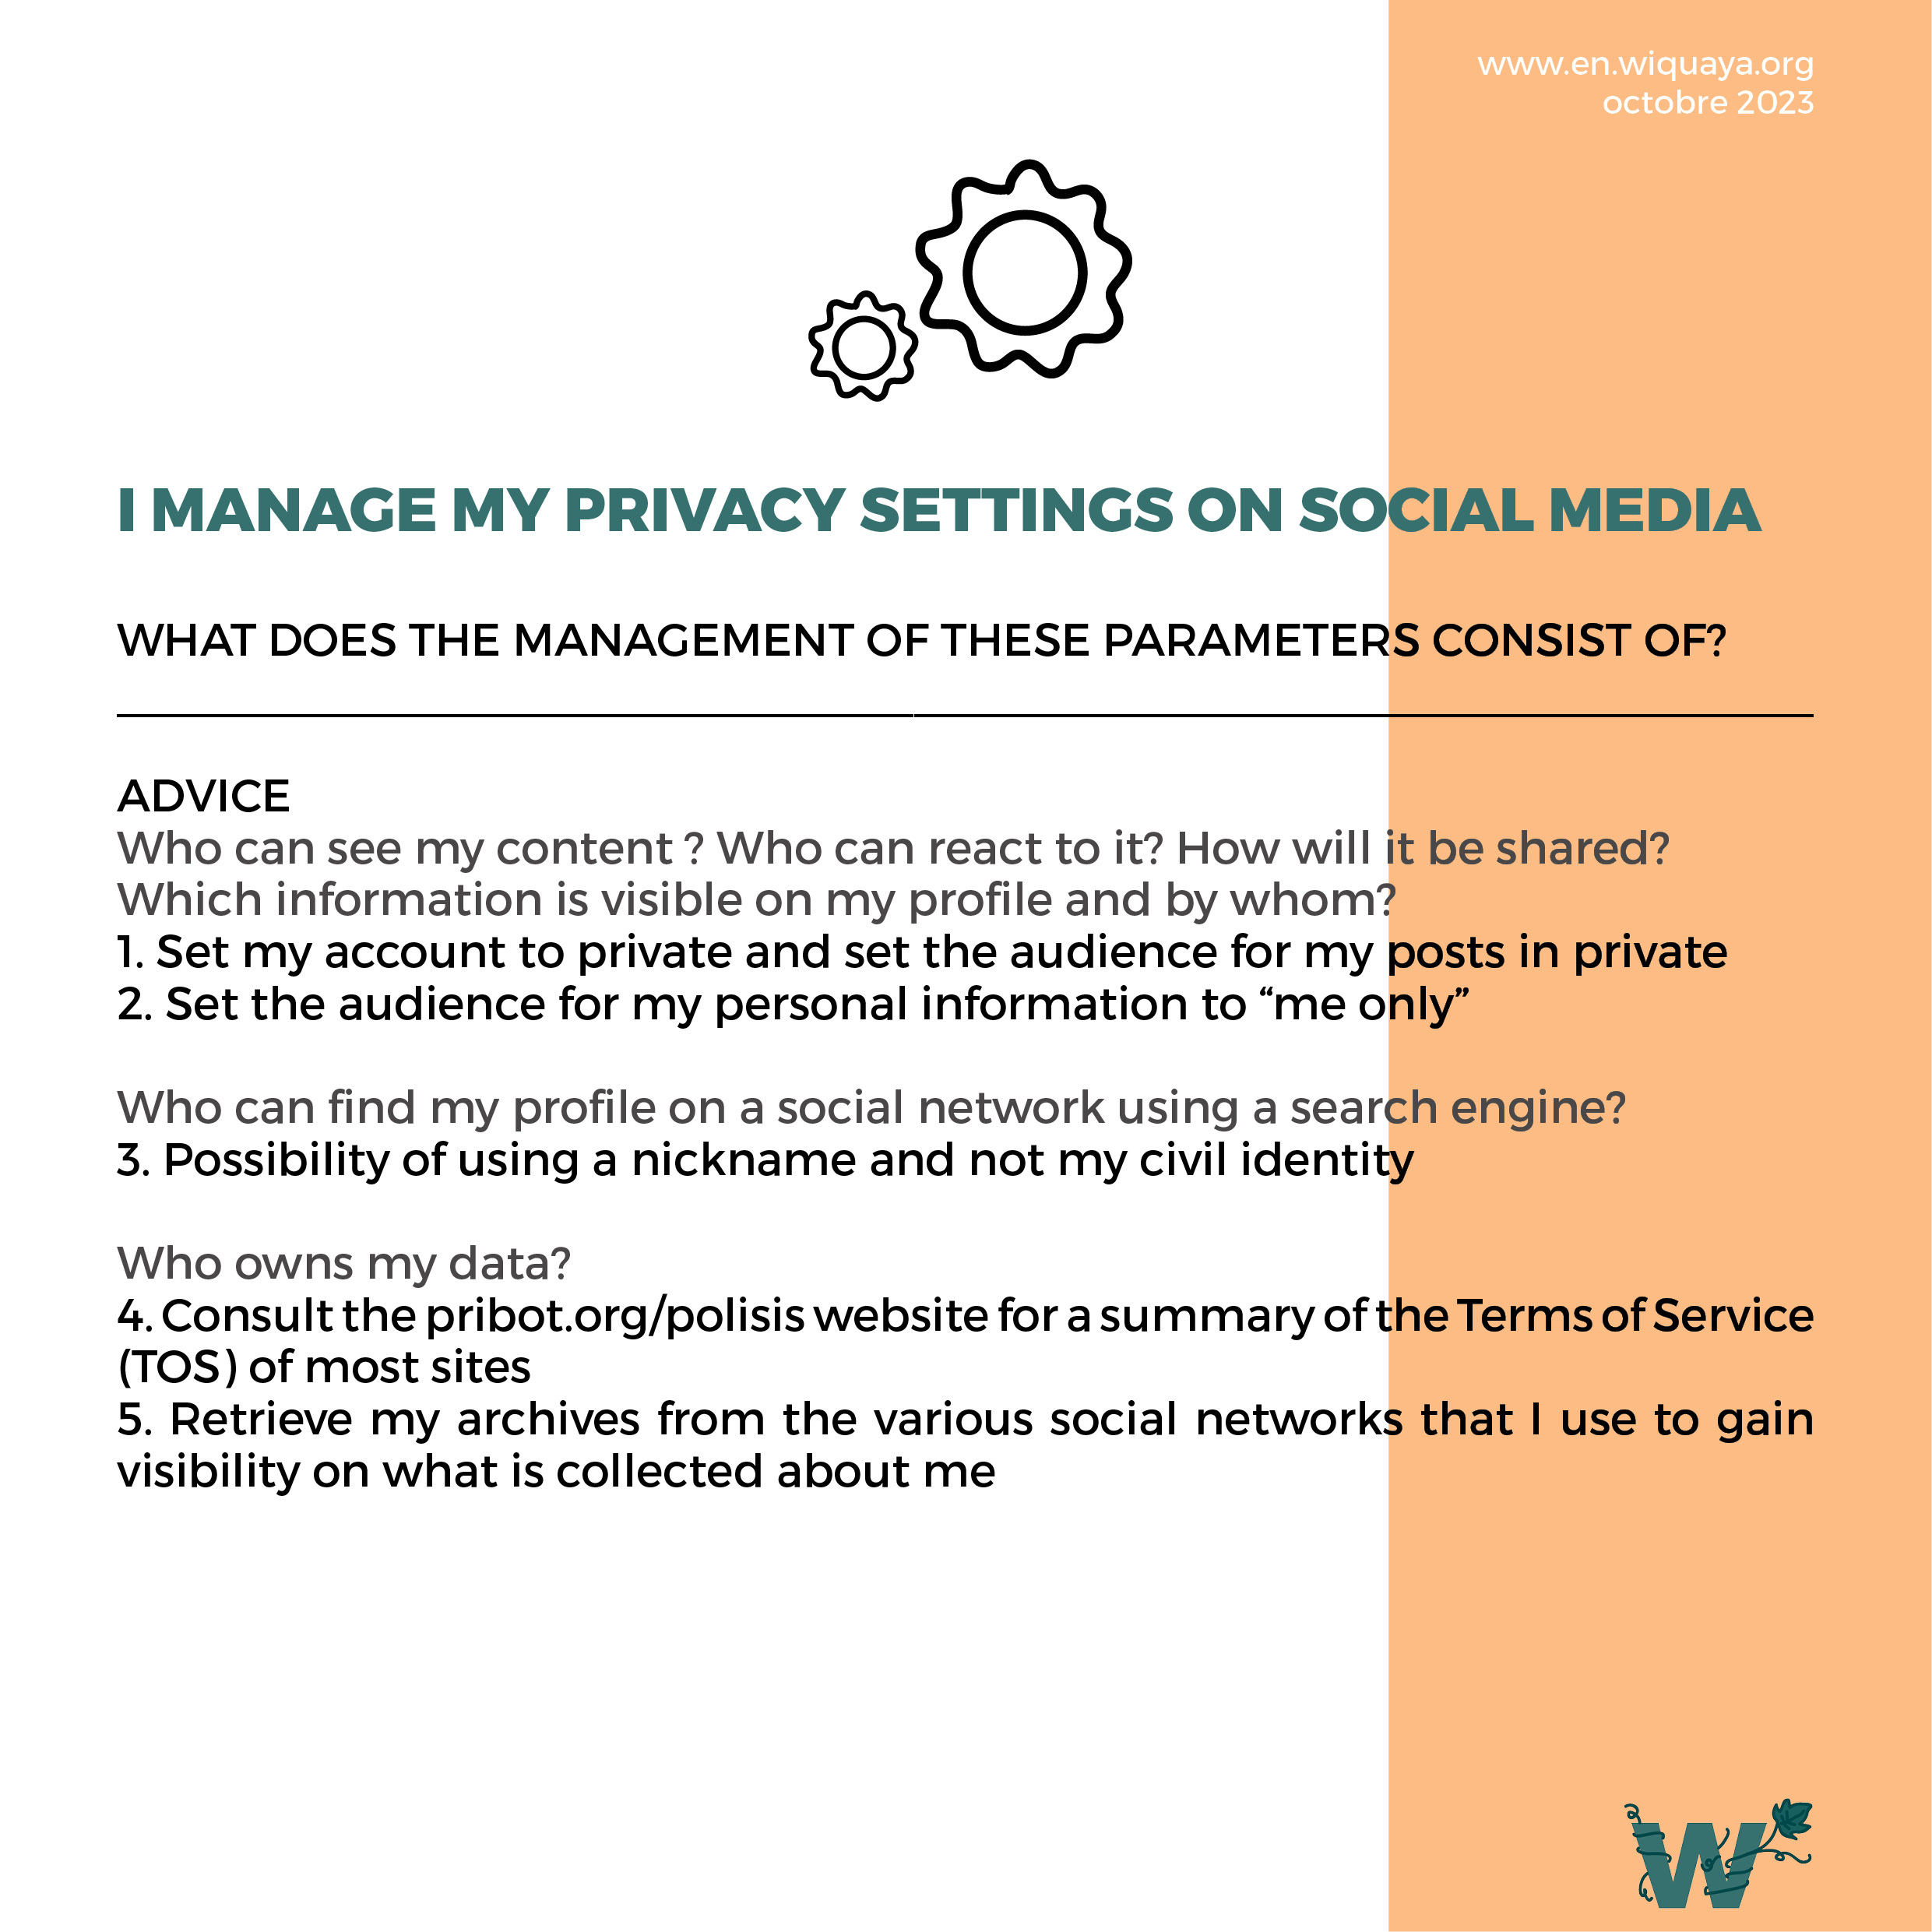 Help sheet I manage my privacy settings on social networks